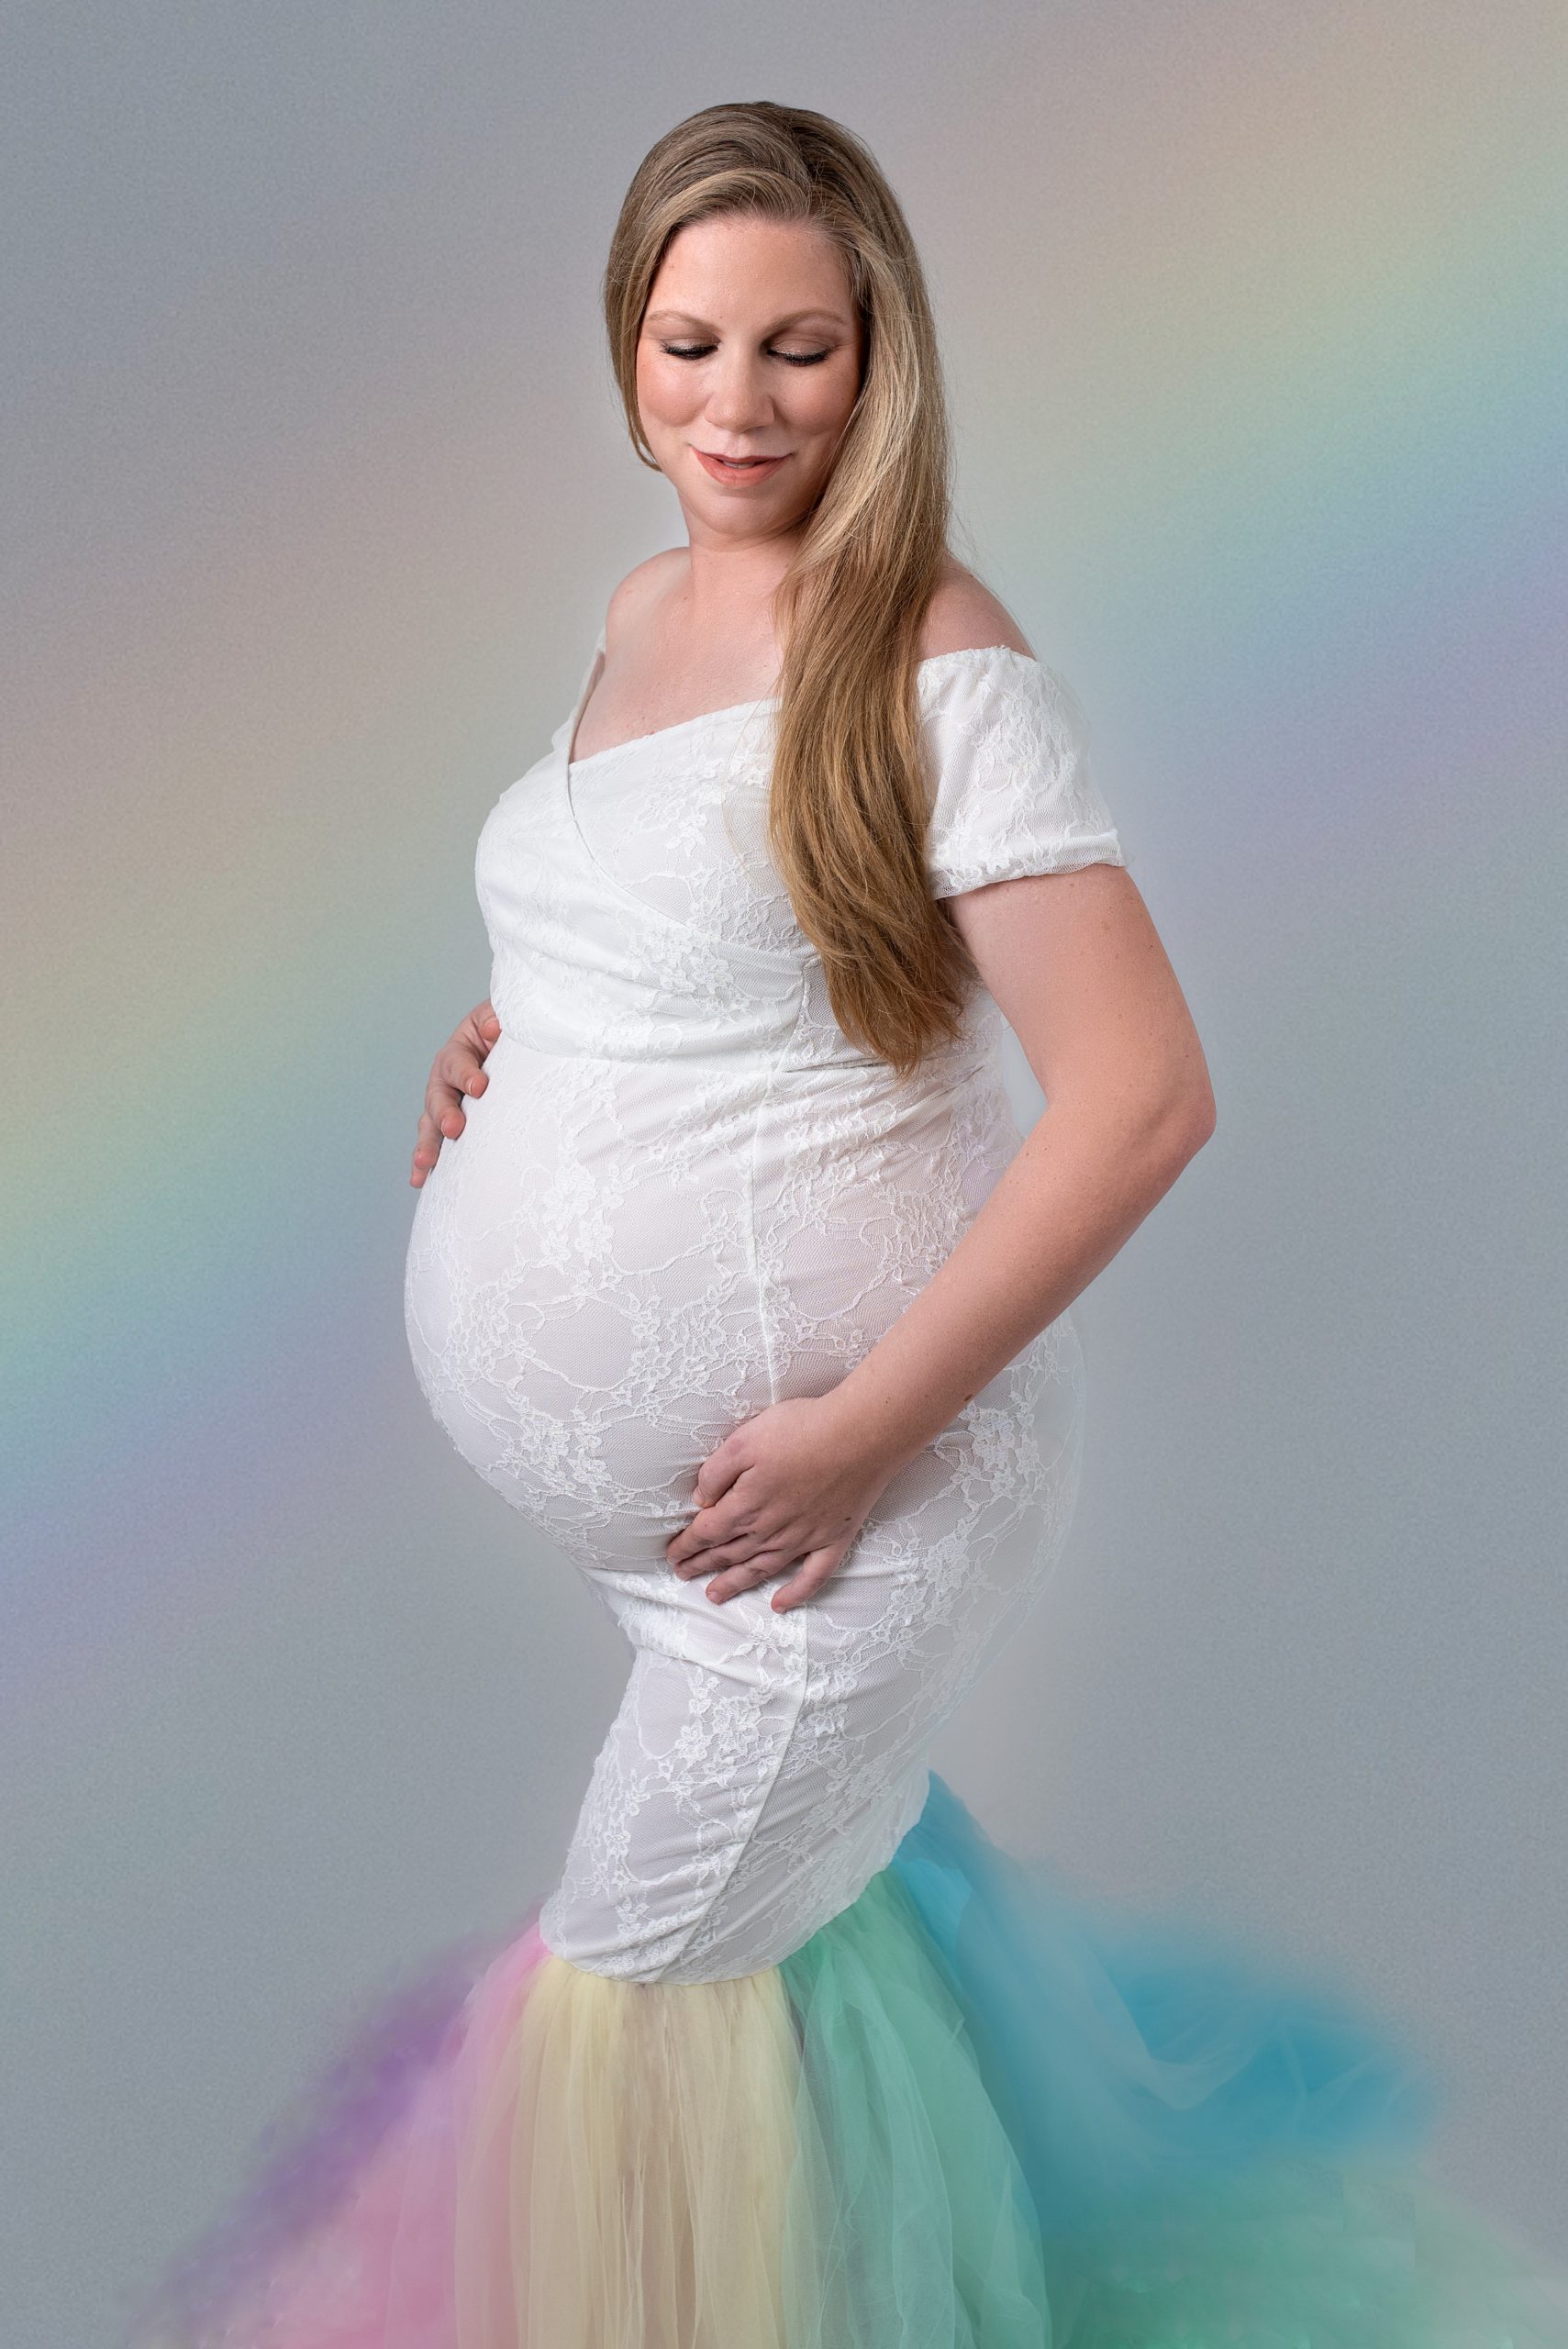 Woman in a rainbow maternity gown stands holding her bump in a studio